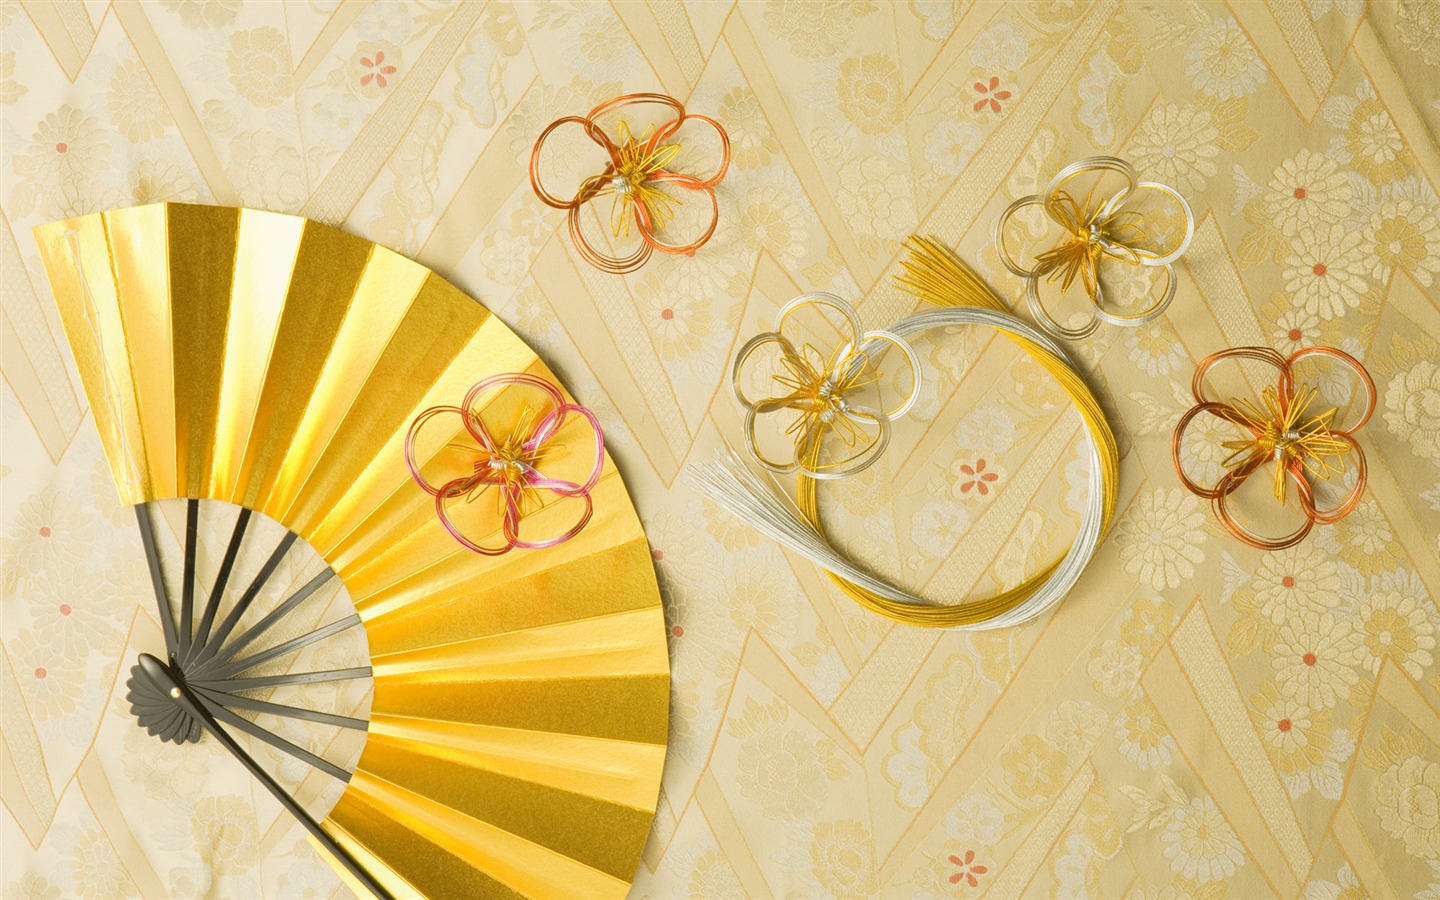 Japanese New Year Culture Wallpaper (2) #16 - 1440x900